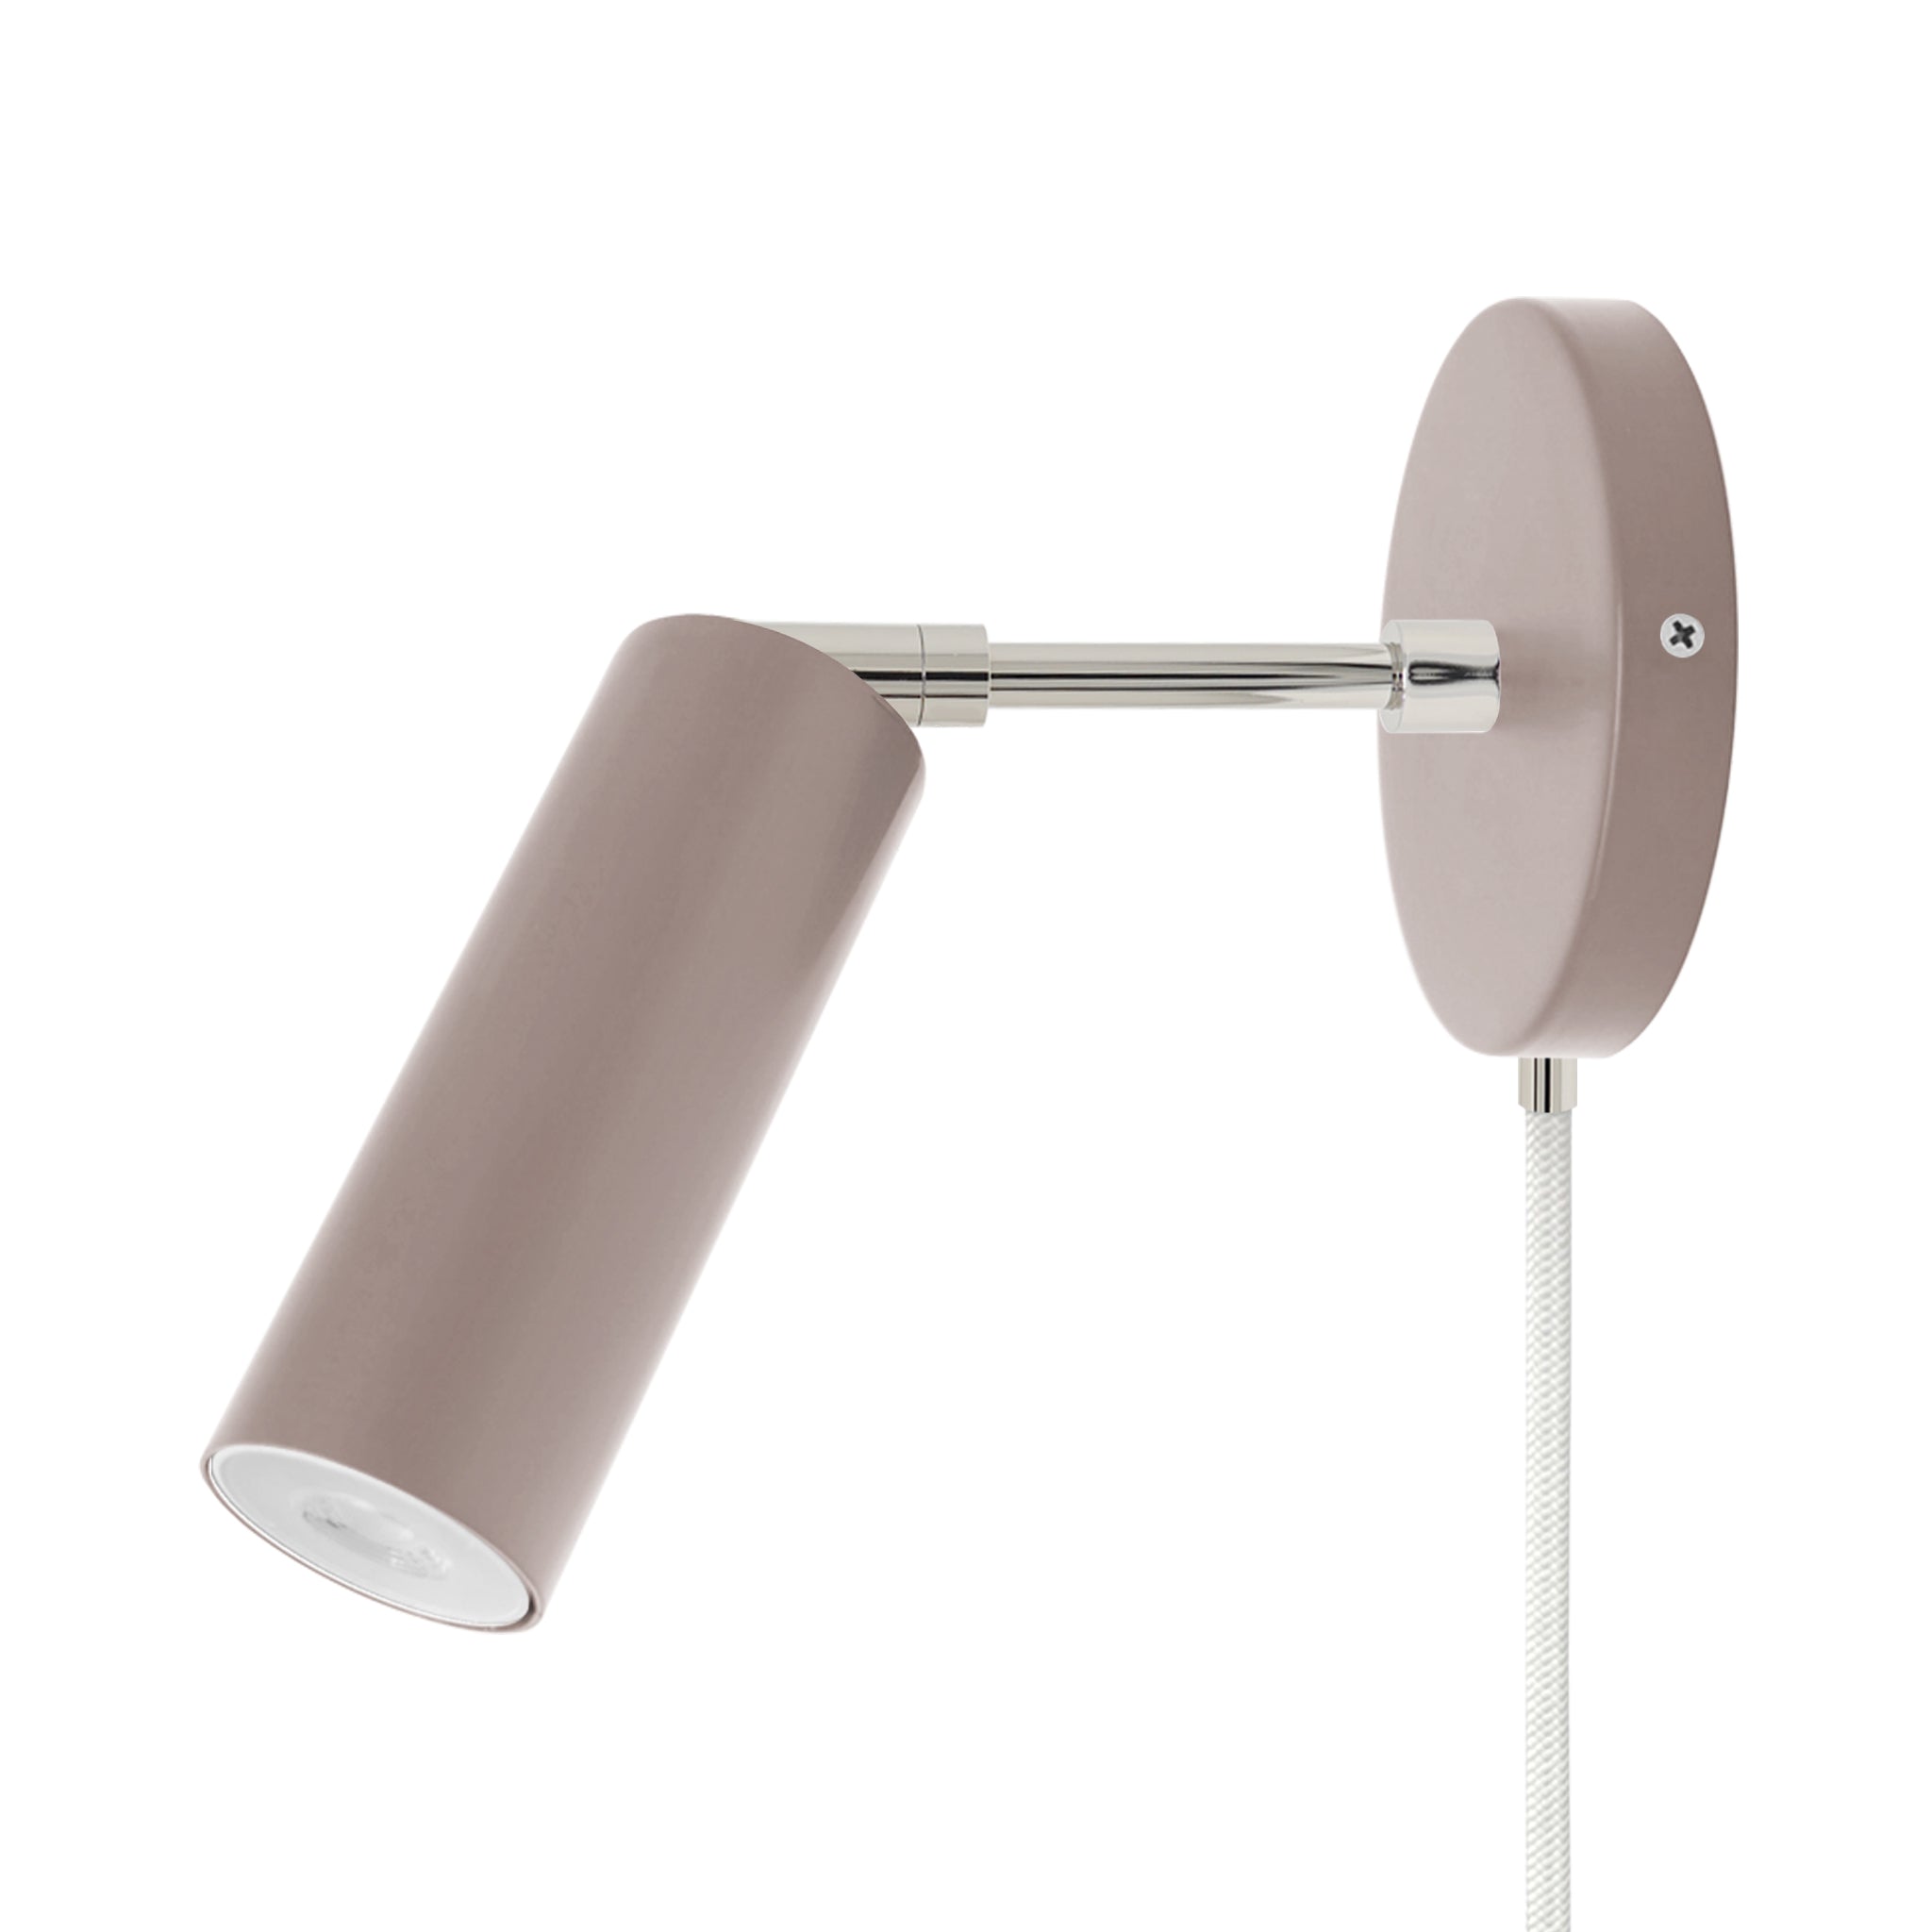 Nickel and barely color Reader plug-in sconce 3" arm Dutton Brown lighting